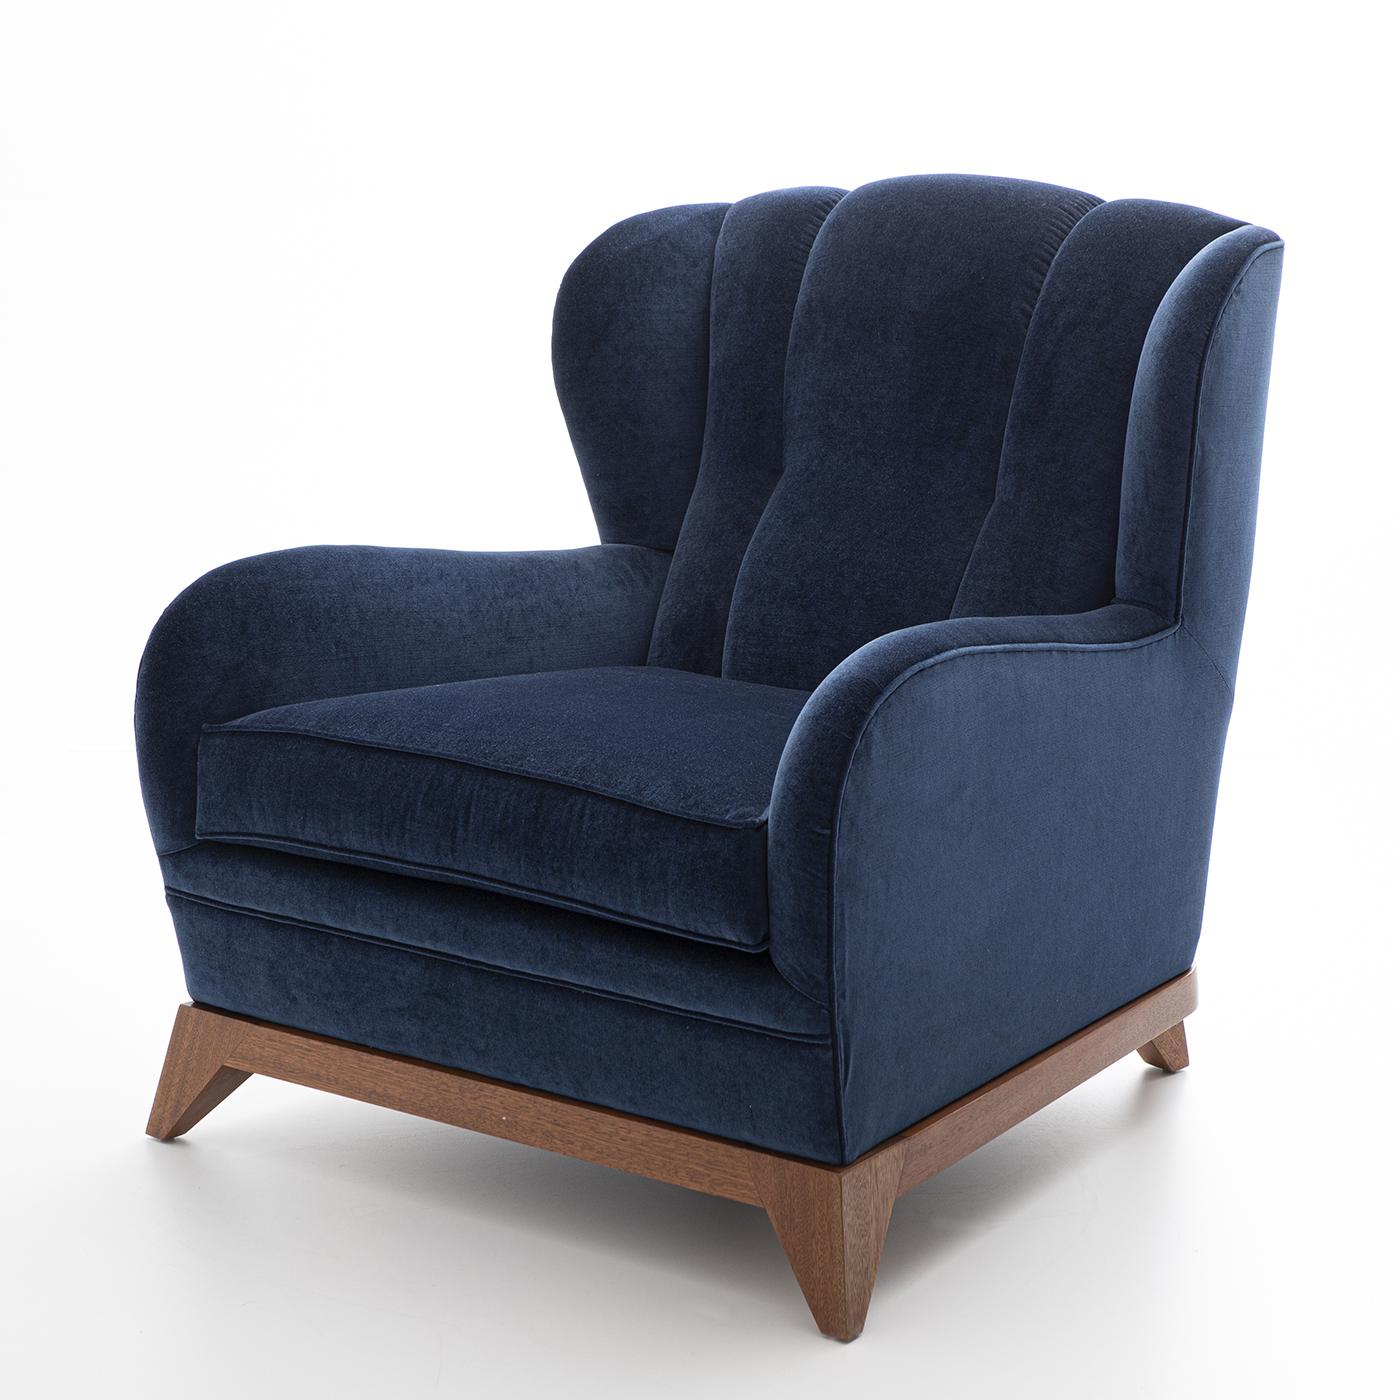 Merging smooth lines and an imposing character, this exquisite wooden armchair exudes comfort and sophistication with its inviting silhouette. Upholstered in deep-blue velvet, it features a wide backrest enlivened by a delicate channeled texture.